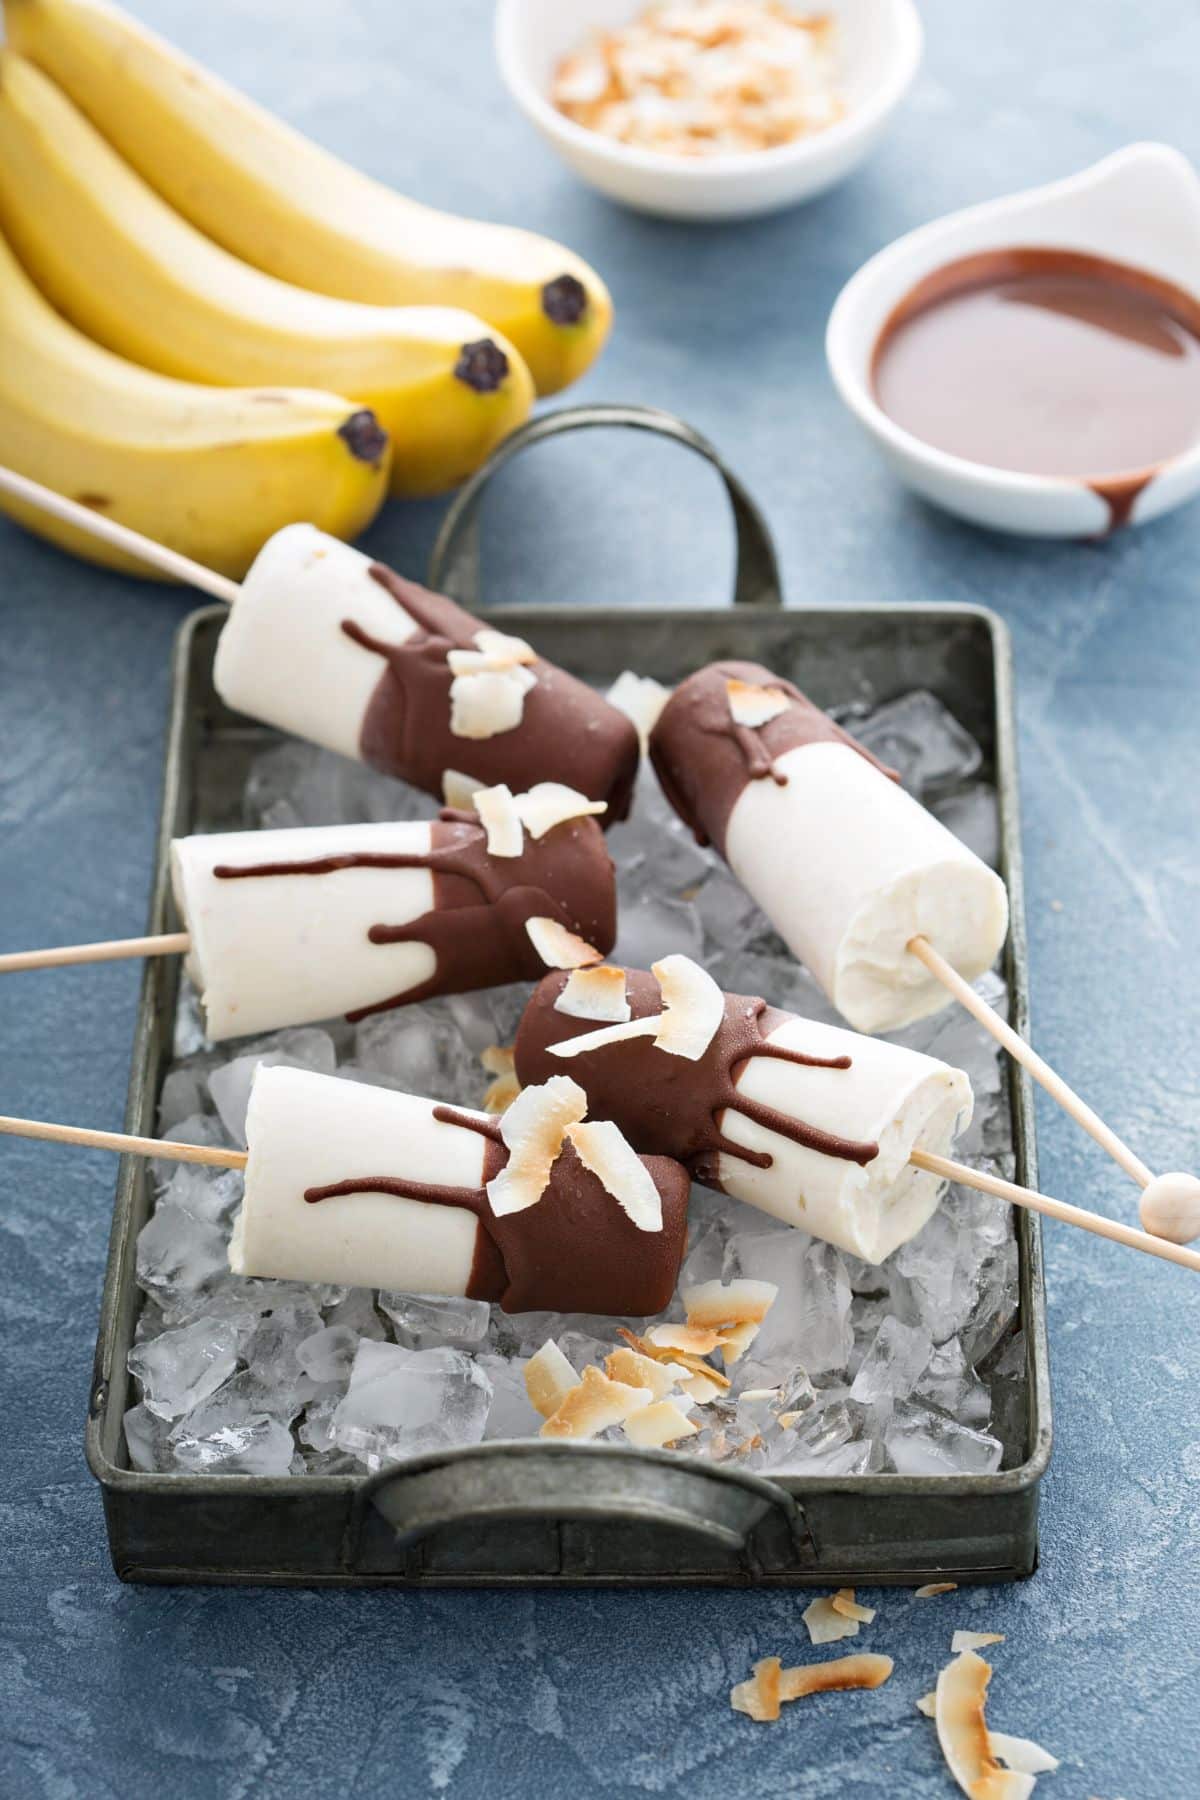 Banana popsicles covered in chocolate sitting in a pan with ice.